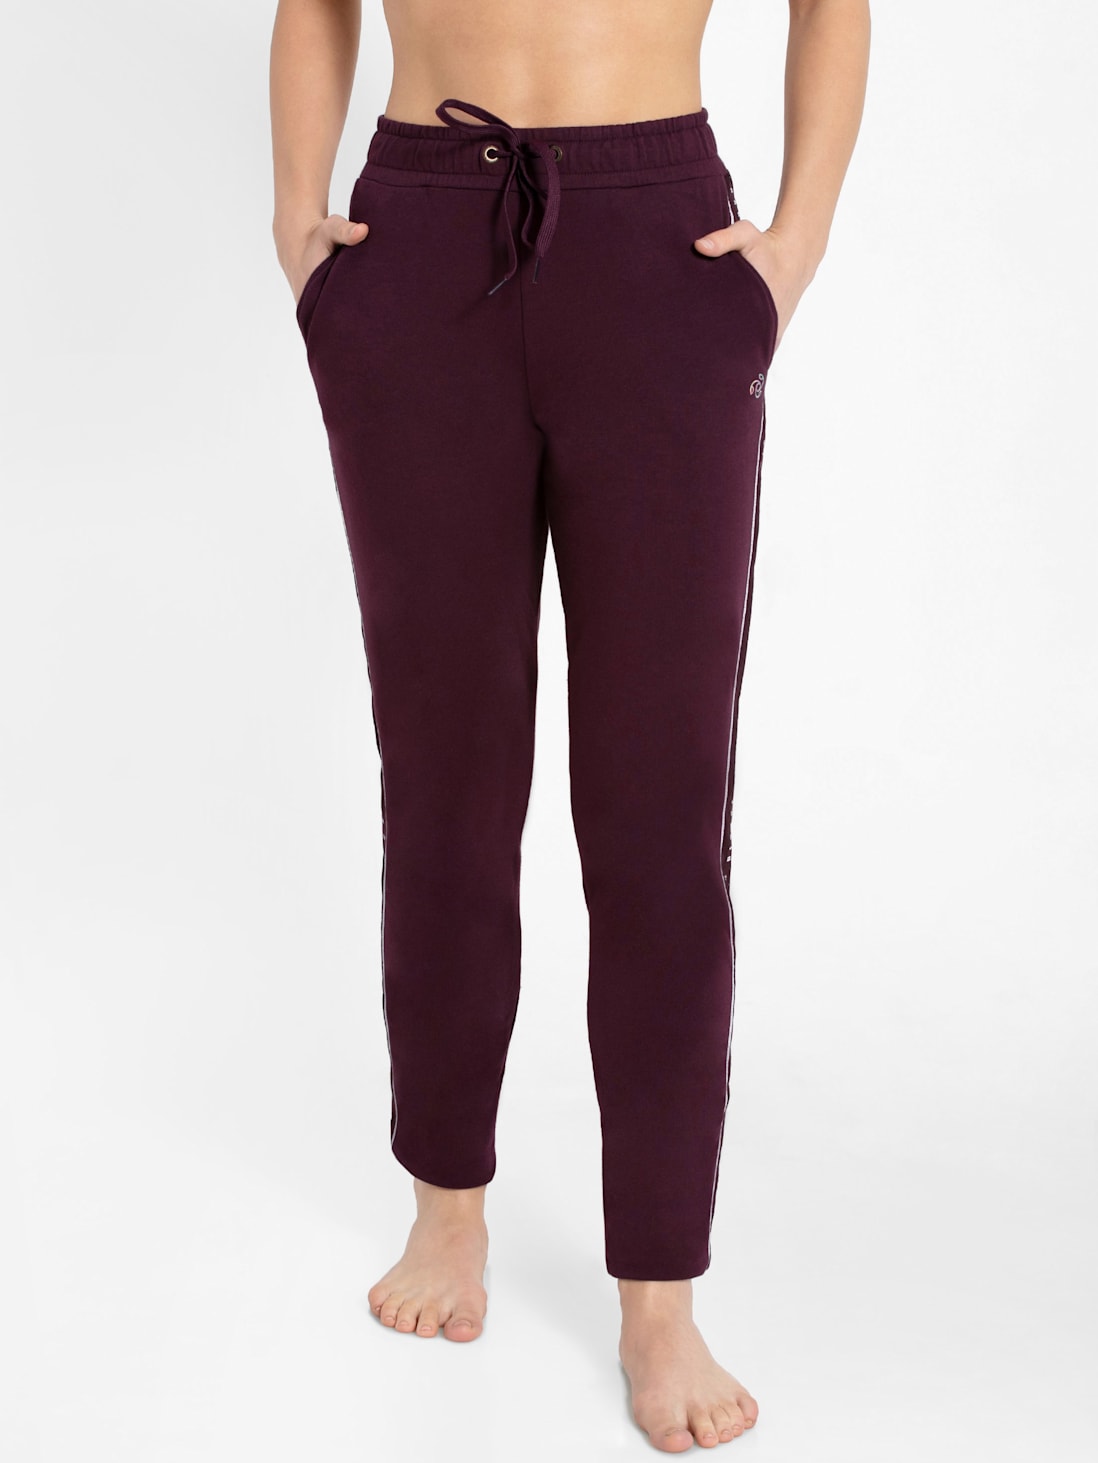 JOCKEY 1305 Solid Women Maroon Track Pants - Buy Rose Petal/Light Grey  Melange JOCKEY 1305 Solid Women Maroon Track Pants Online at Best Prices in  India